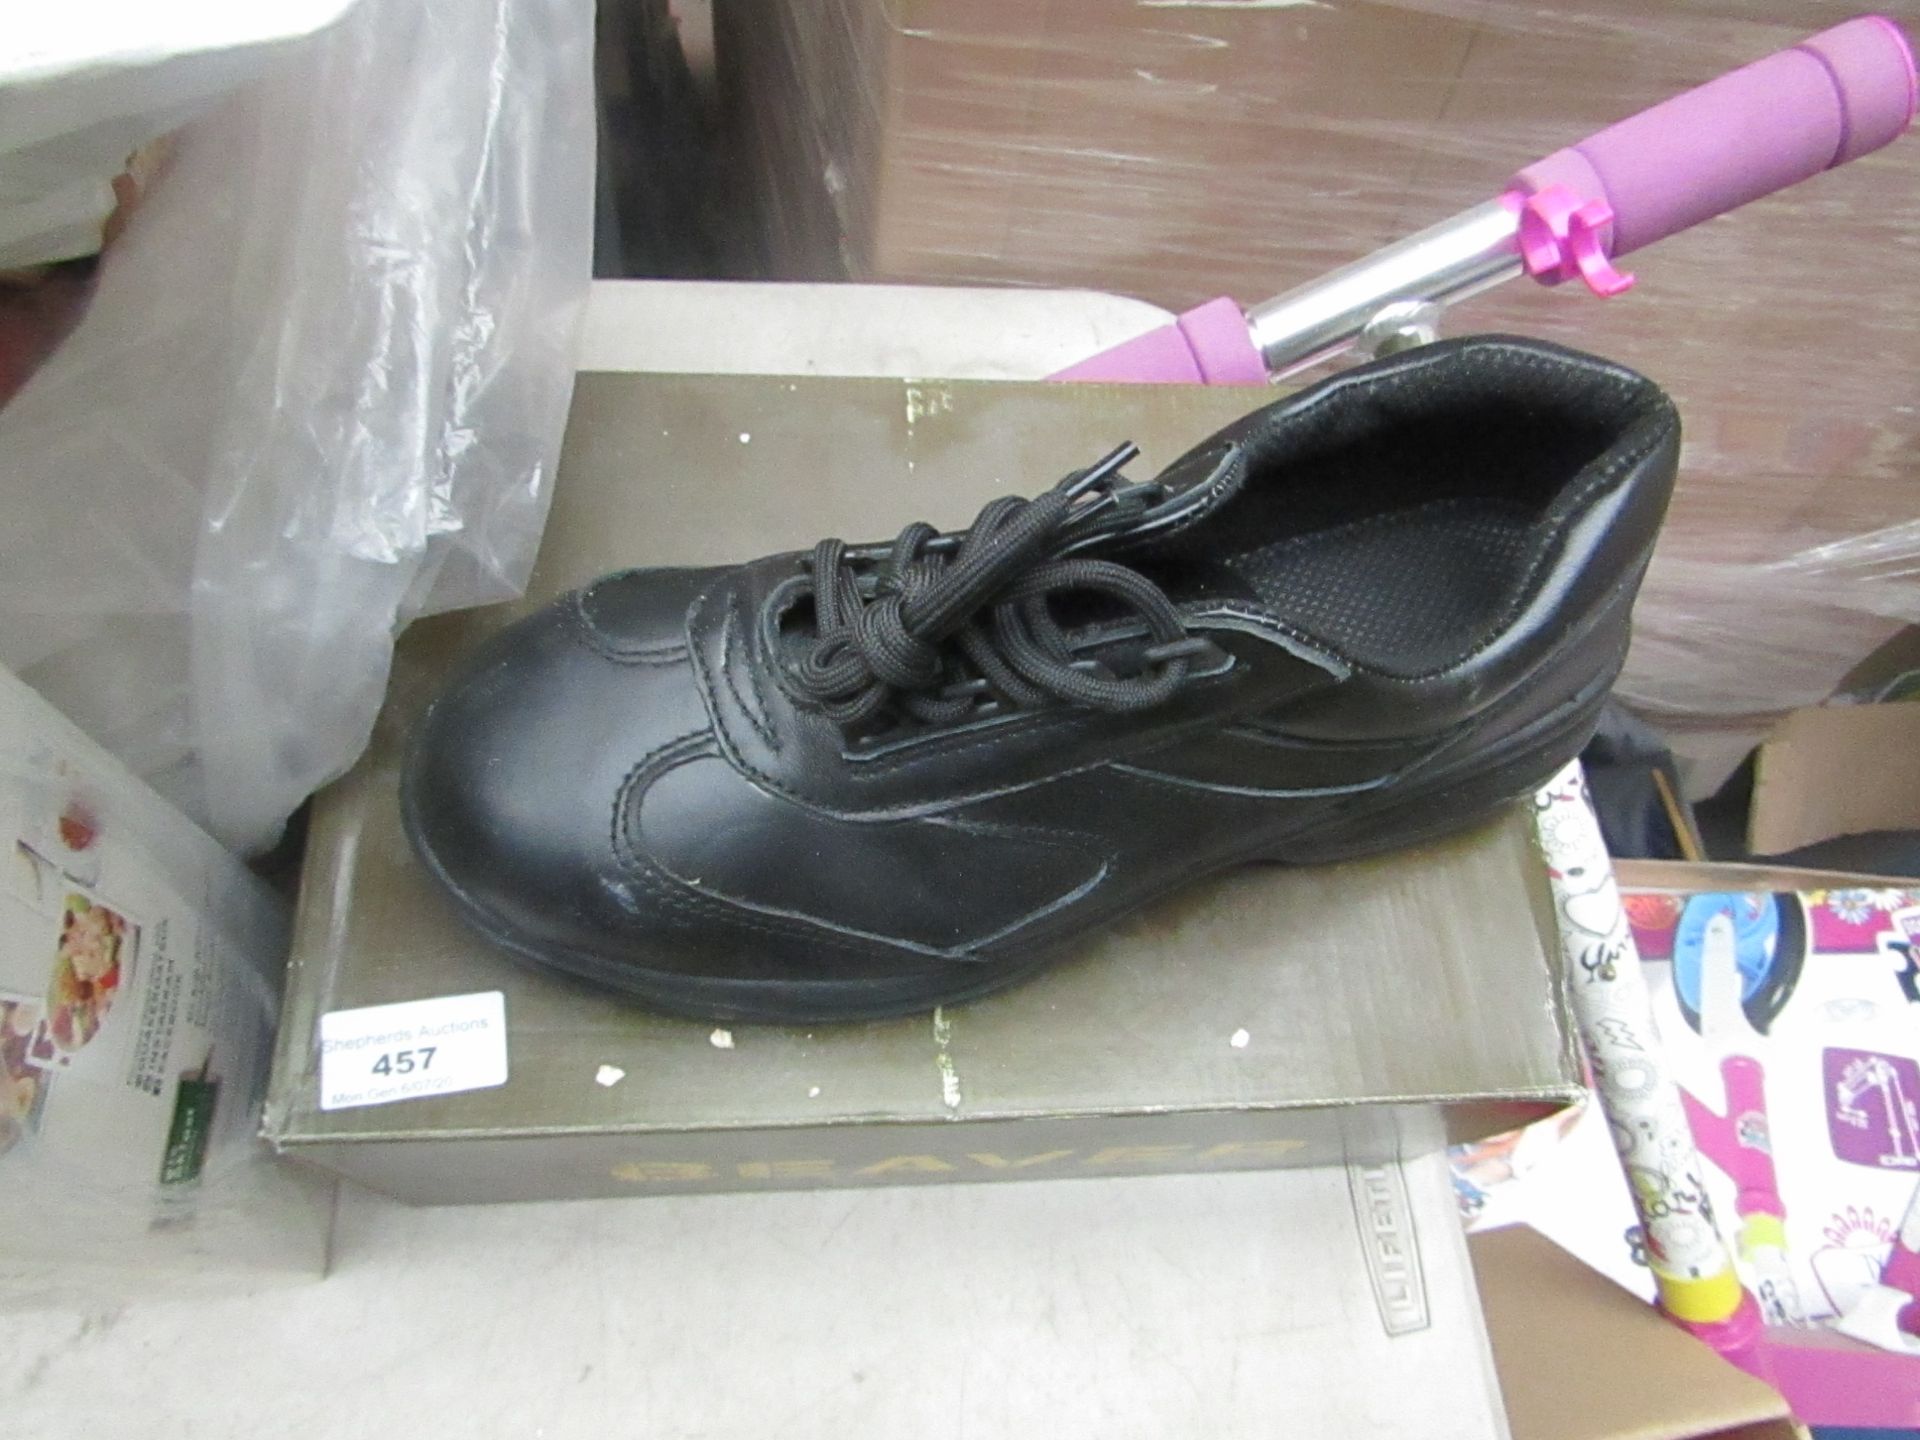 Beaver safety steel toe cap shoes, size 7, new and boxed.